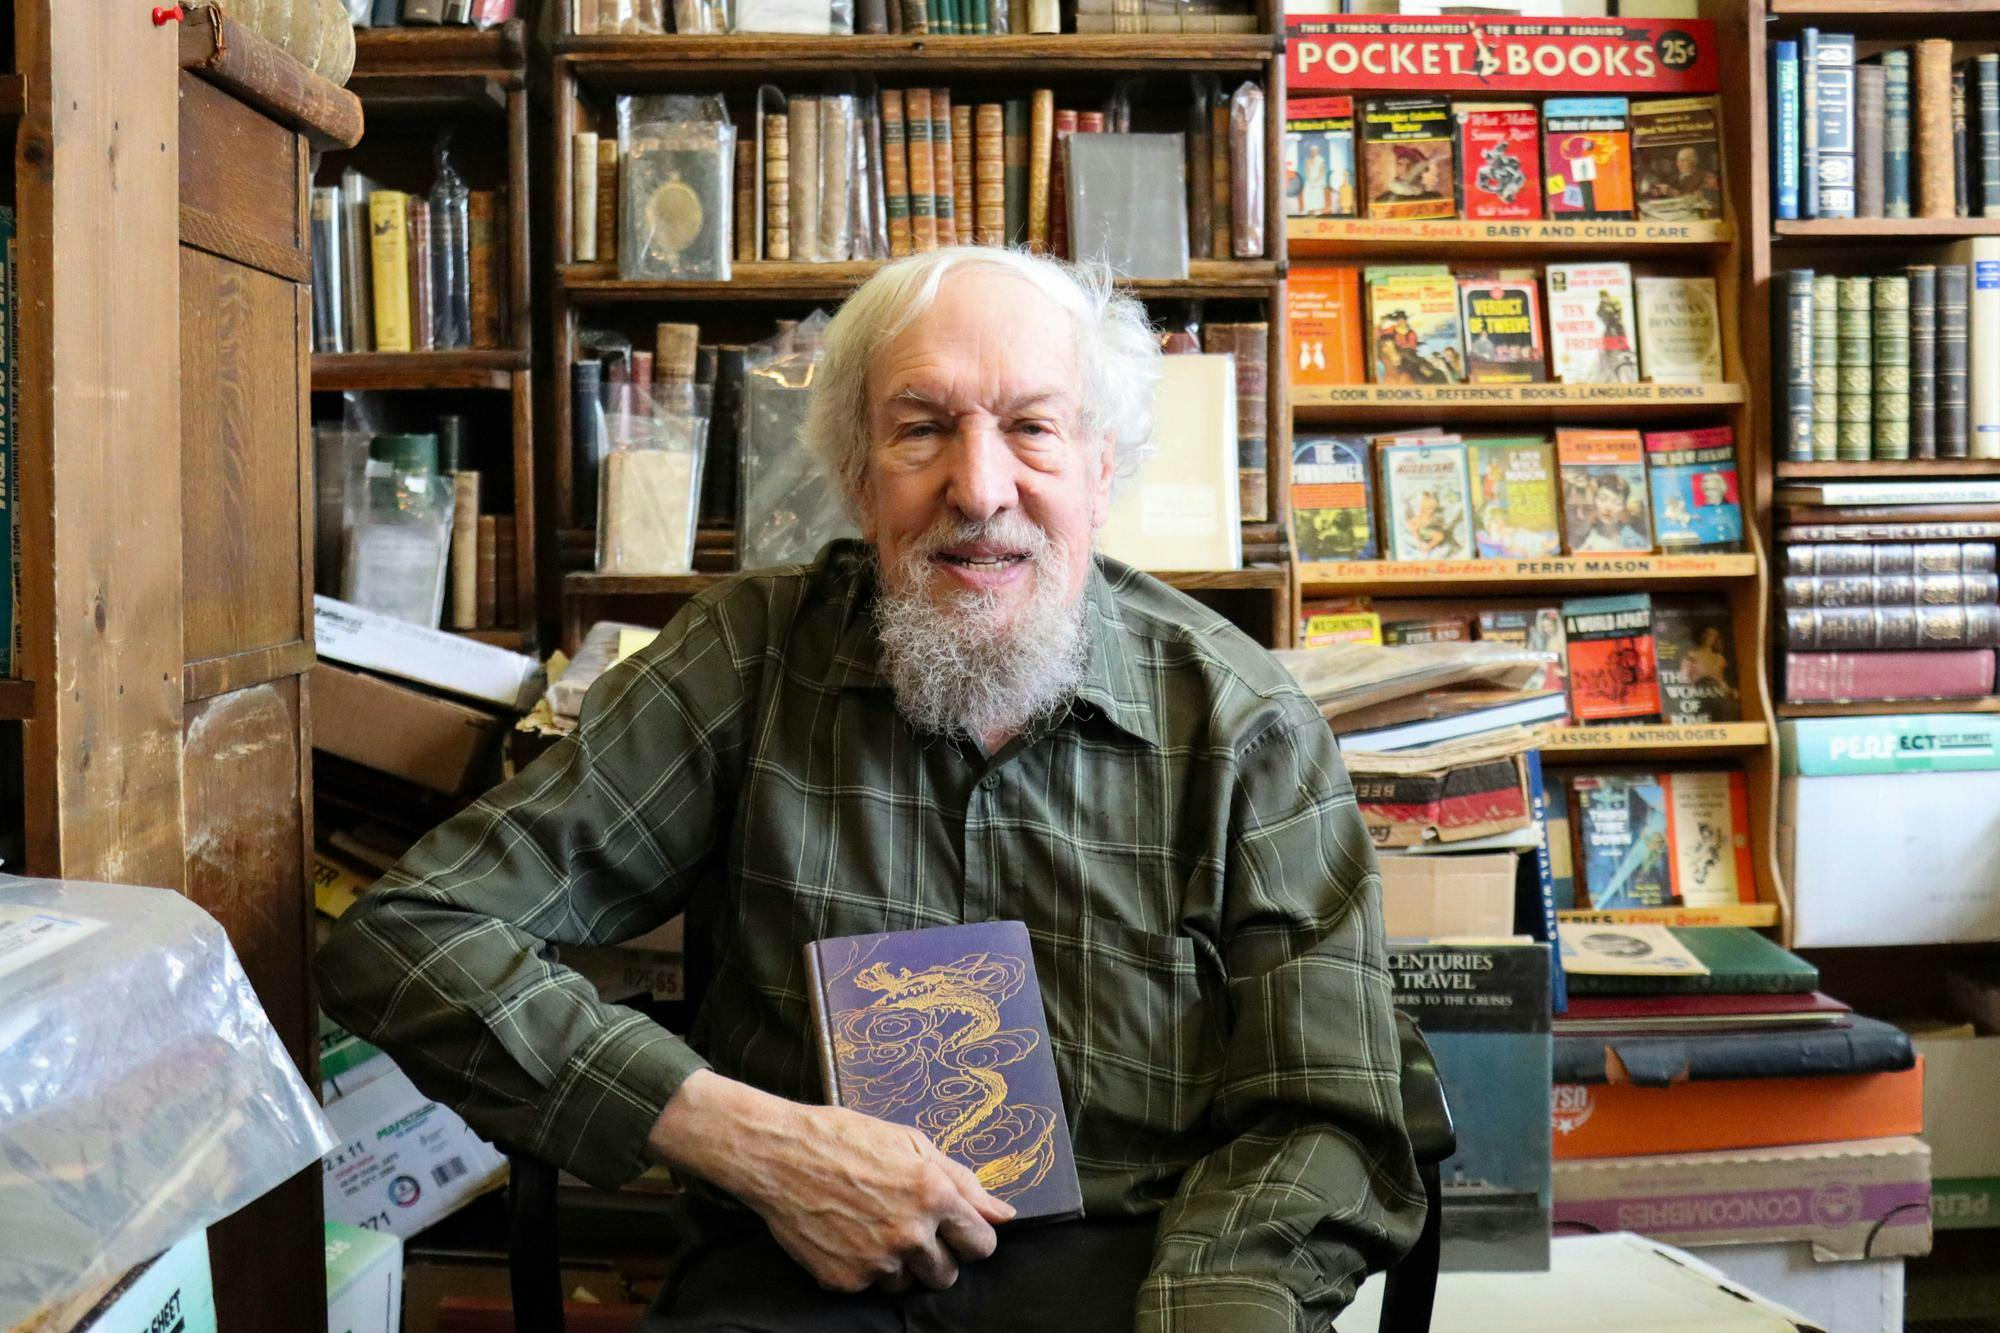 <p>Archives Book Shop in East Lansing set to close in the coming days. Some final documented memories, Wednesday, Jan. 21. Walsh shared his thoughts on his favorite books and favorite memories when surrounded by books. Walsh takes his art very seriously and inspires future generations as he has been in the business for over 35 years.</p>